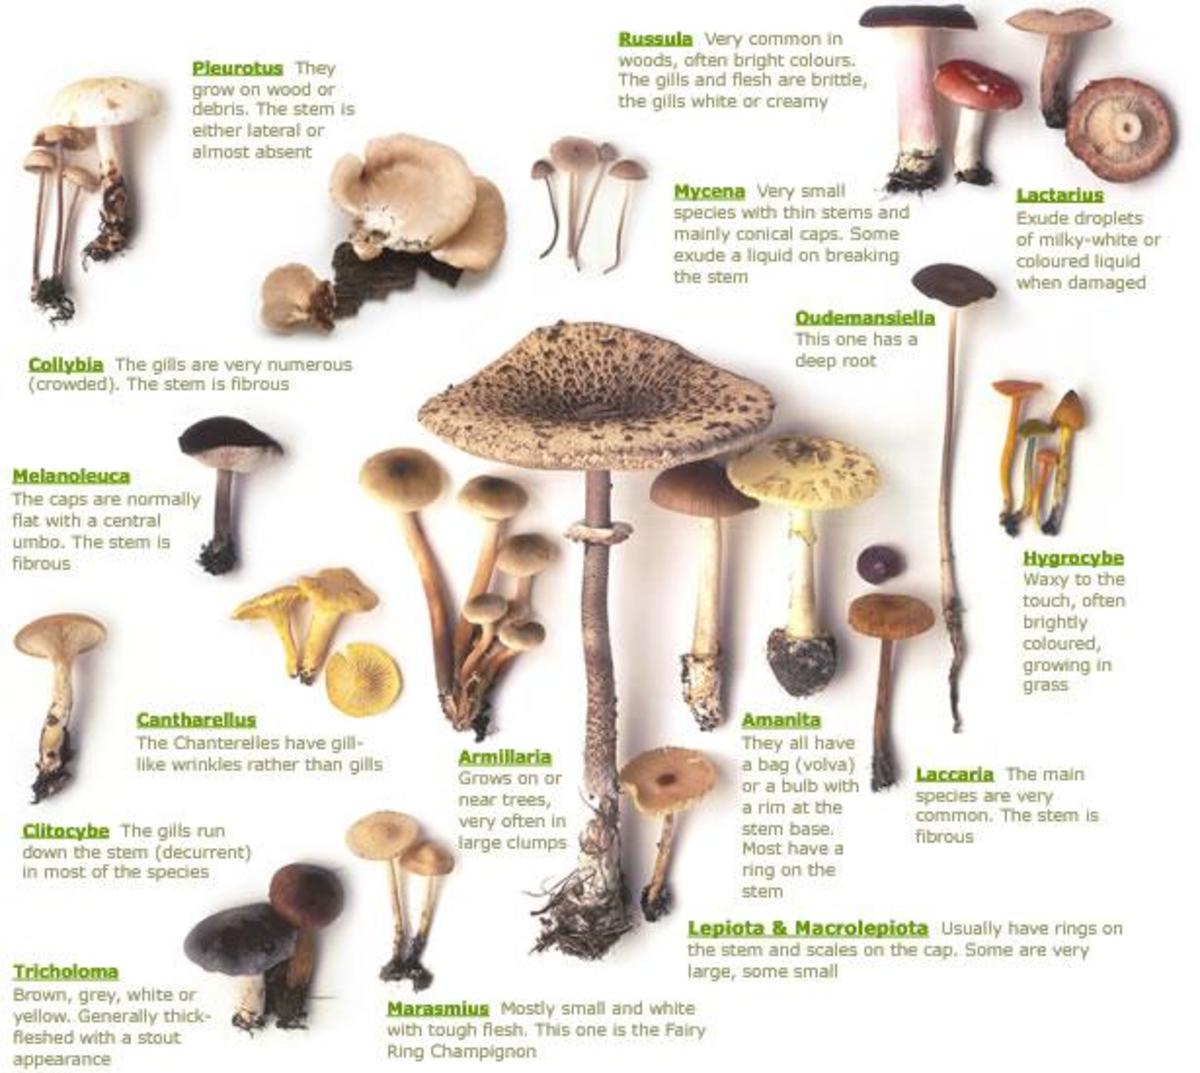 Types Of Poisonous Mushrooms | HubPages
